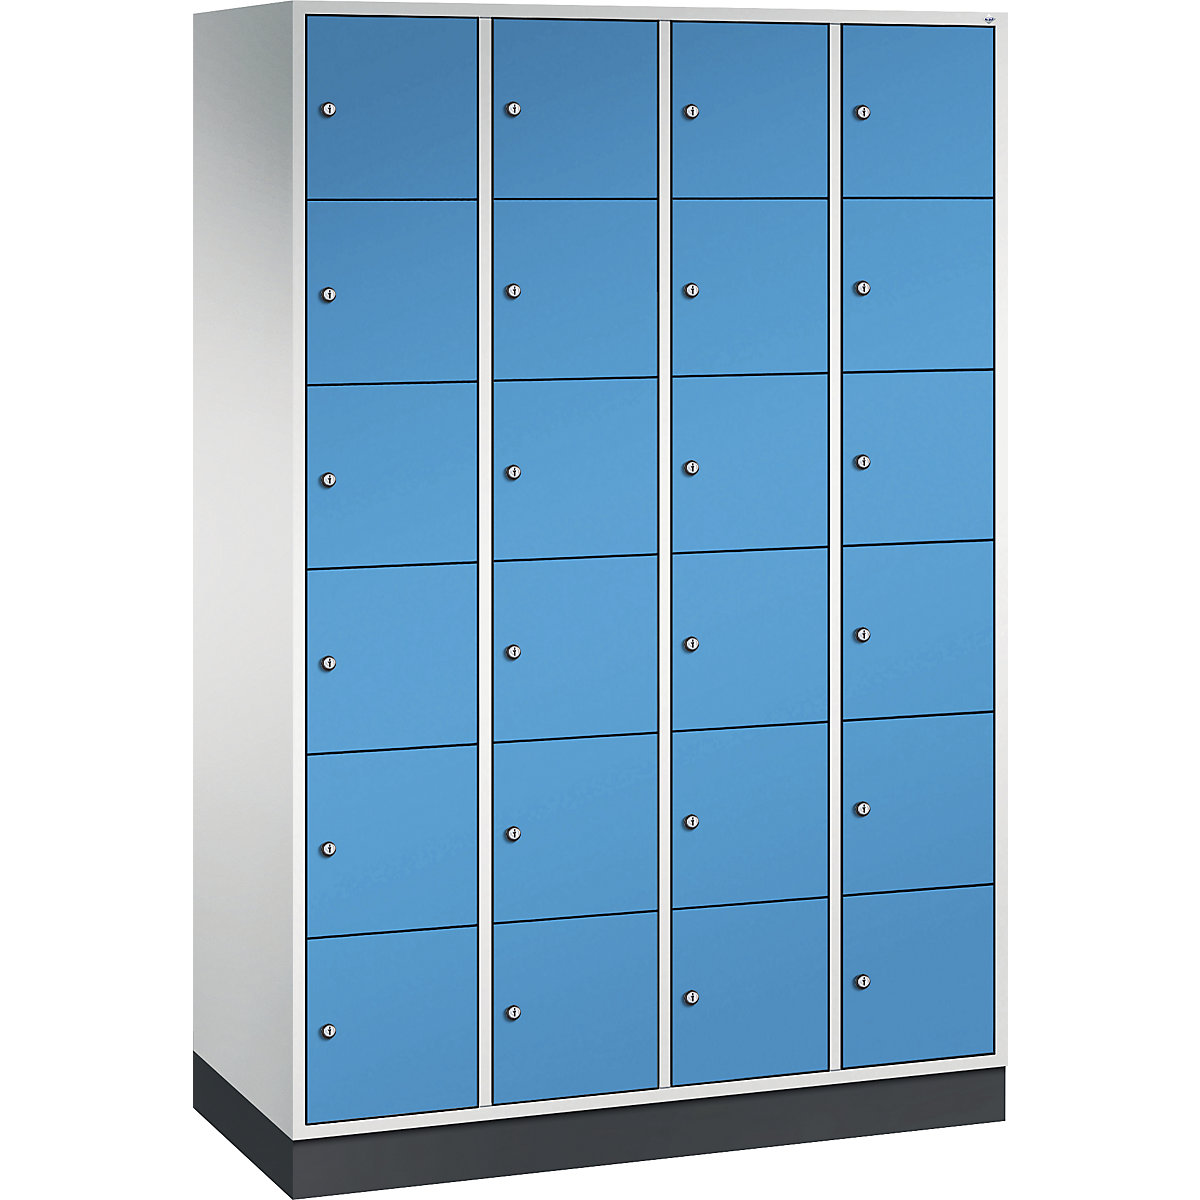 INTRO steel compartment locker, compartment height 285 mm – C+P, WxD 1220 x 500 mm, 24 compartments, light grey body, light blue doors-8